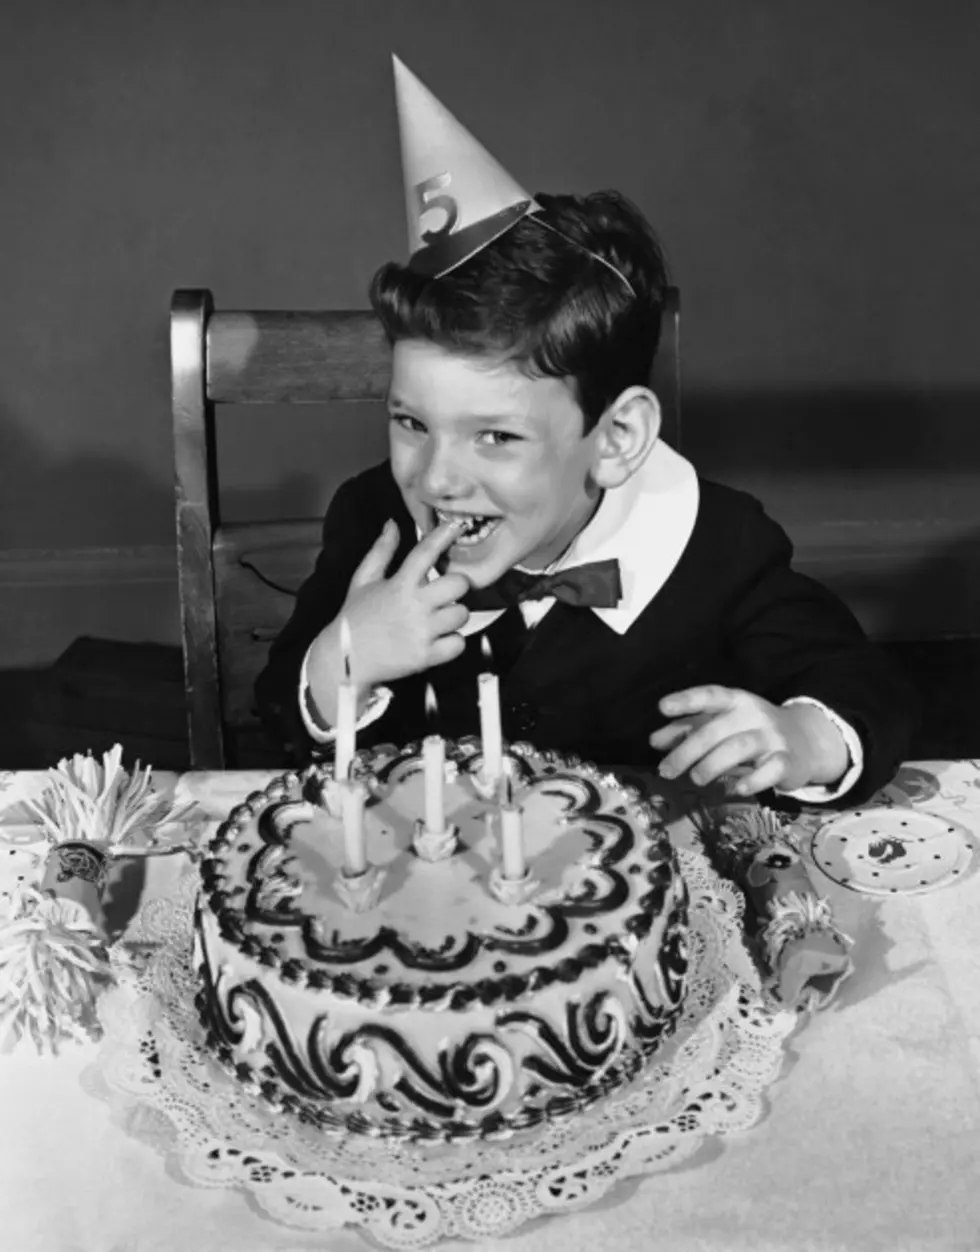 Another Birthday On The Horizon, No Big Deal &#8211; Brian&#8217;s Blog